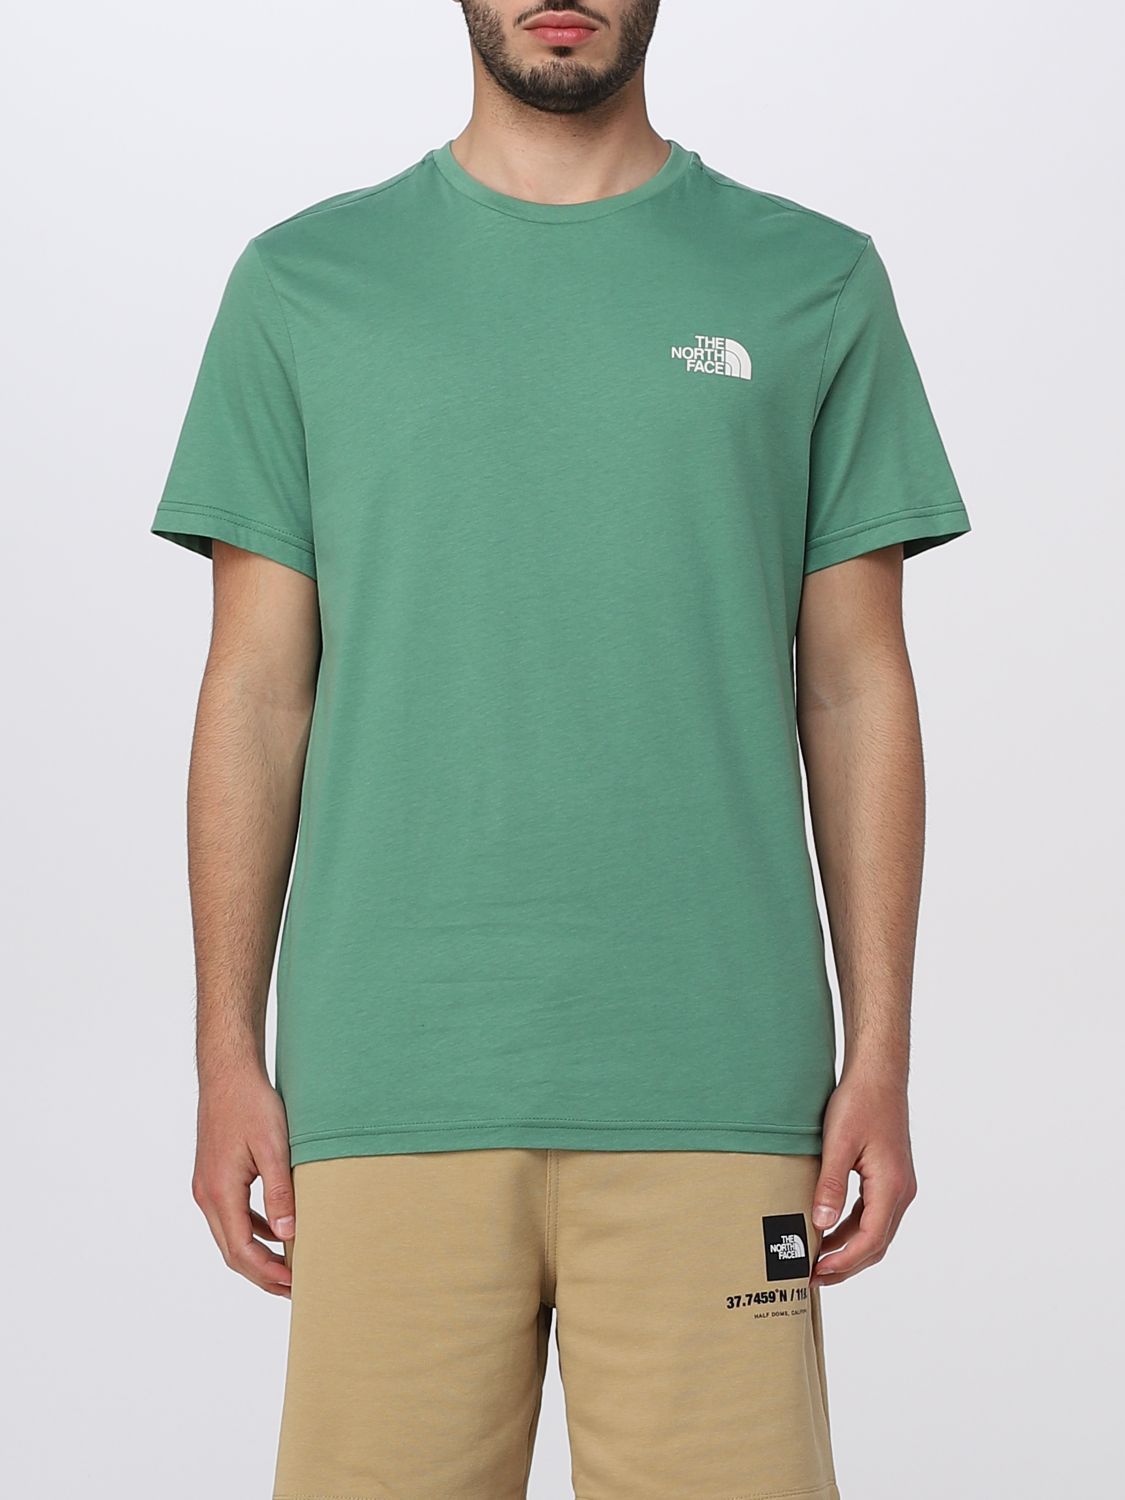 The North Face T-shirt  Men Color Green